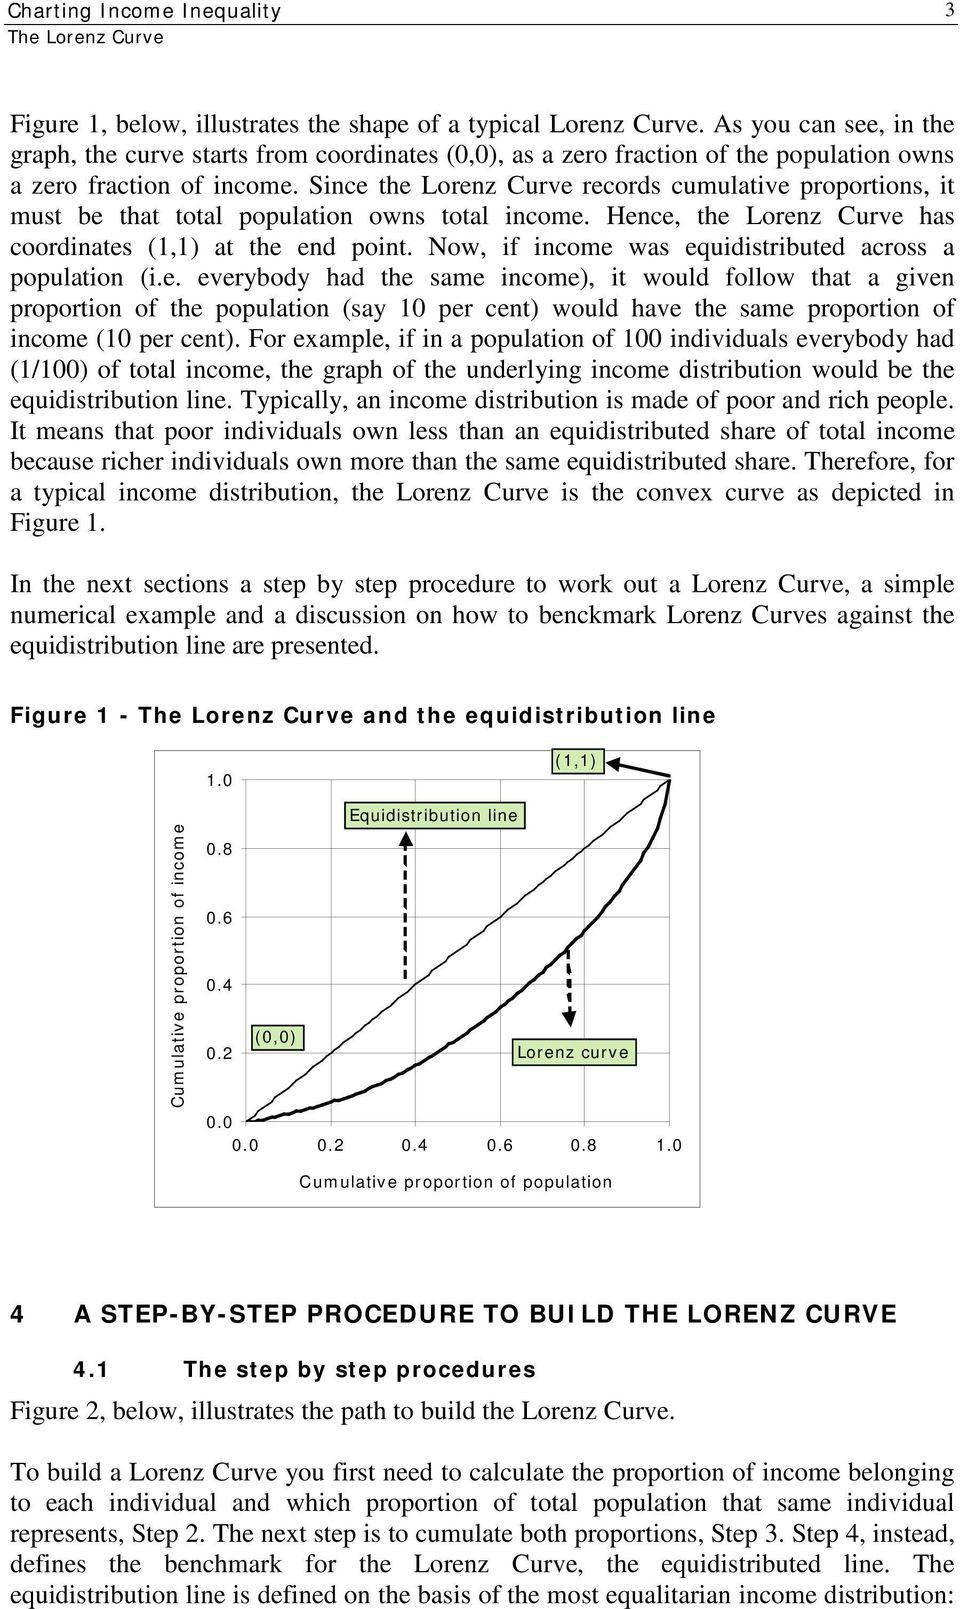 Since the Lorenz Curve records cumulative proportions, it must be that total population owns total income. Hence, the Lorenz Curve has coordinates (,) at the end point.